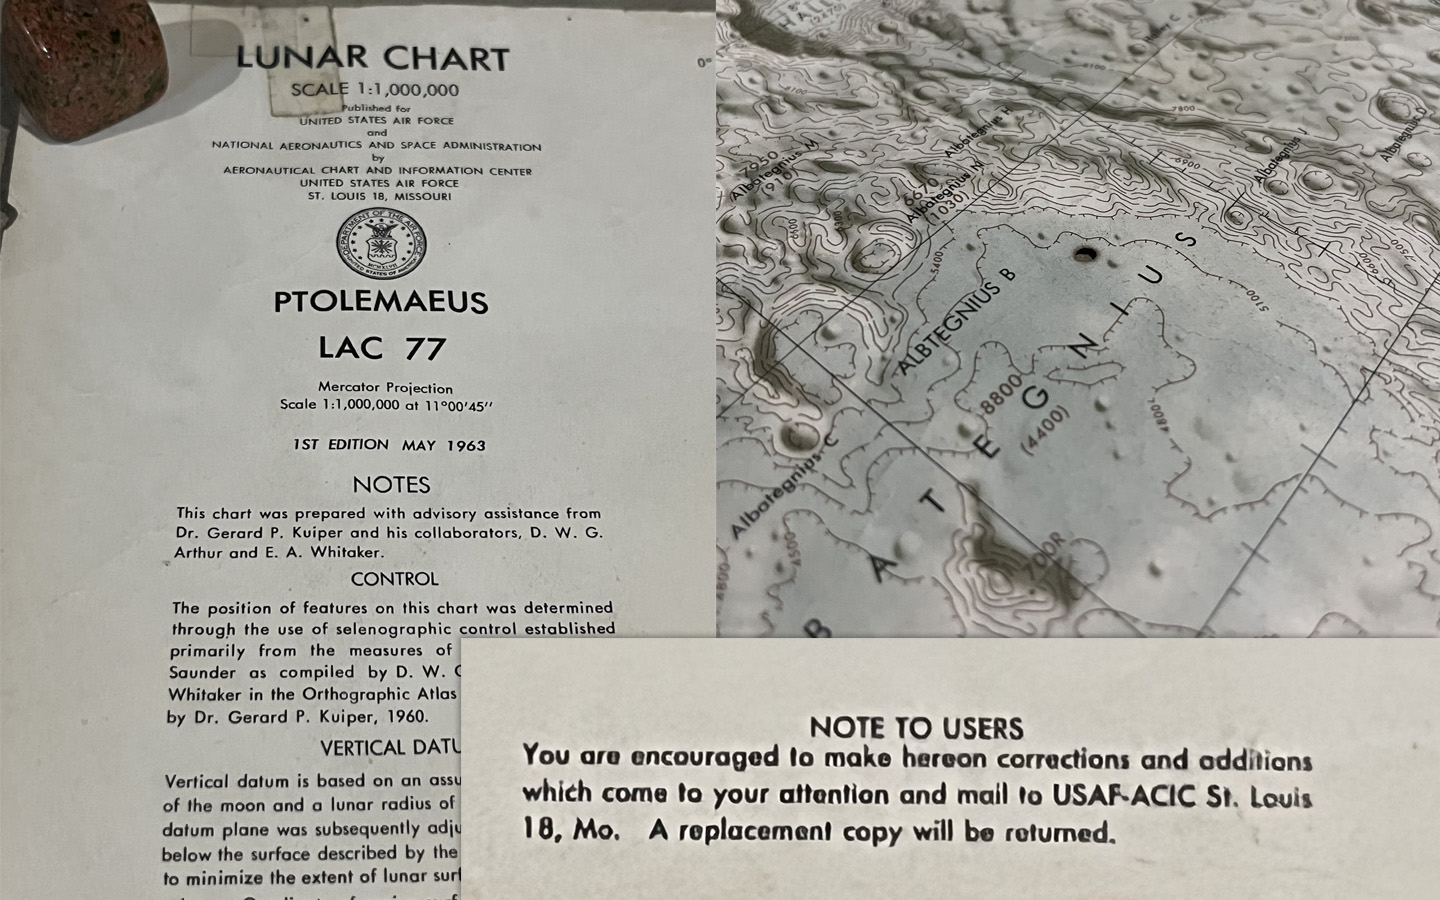 Details from Lunar Chart LAC 77